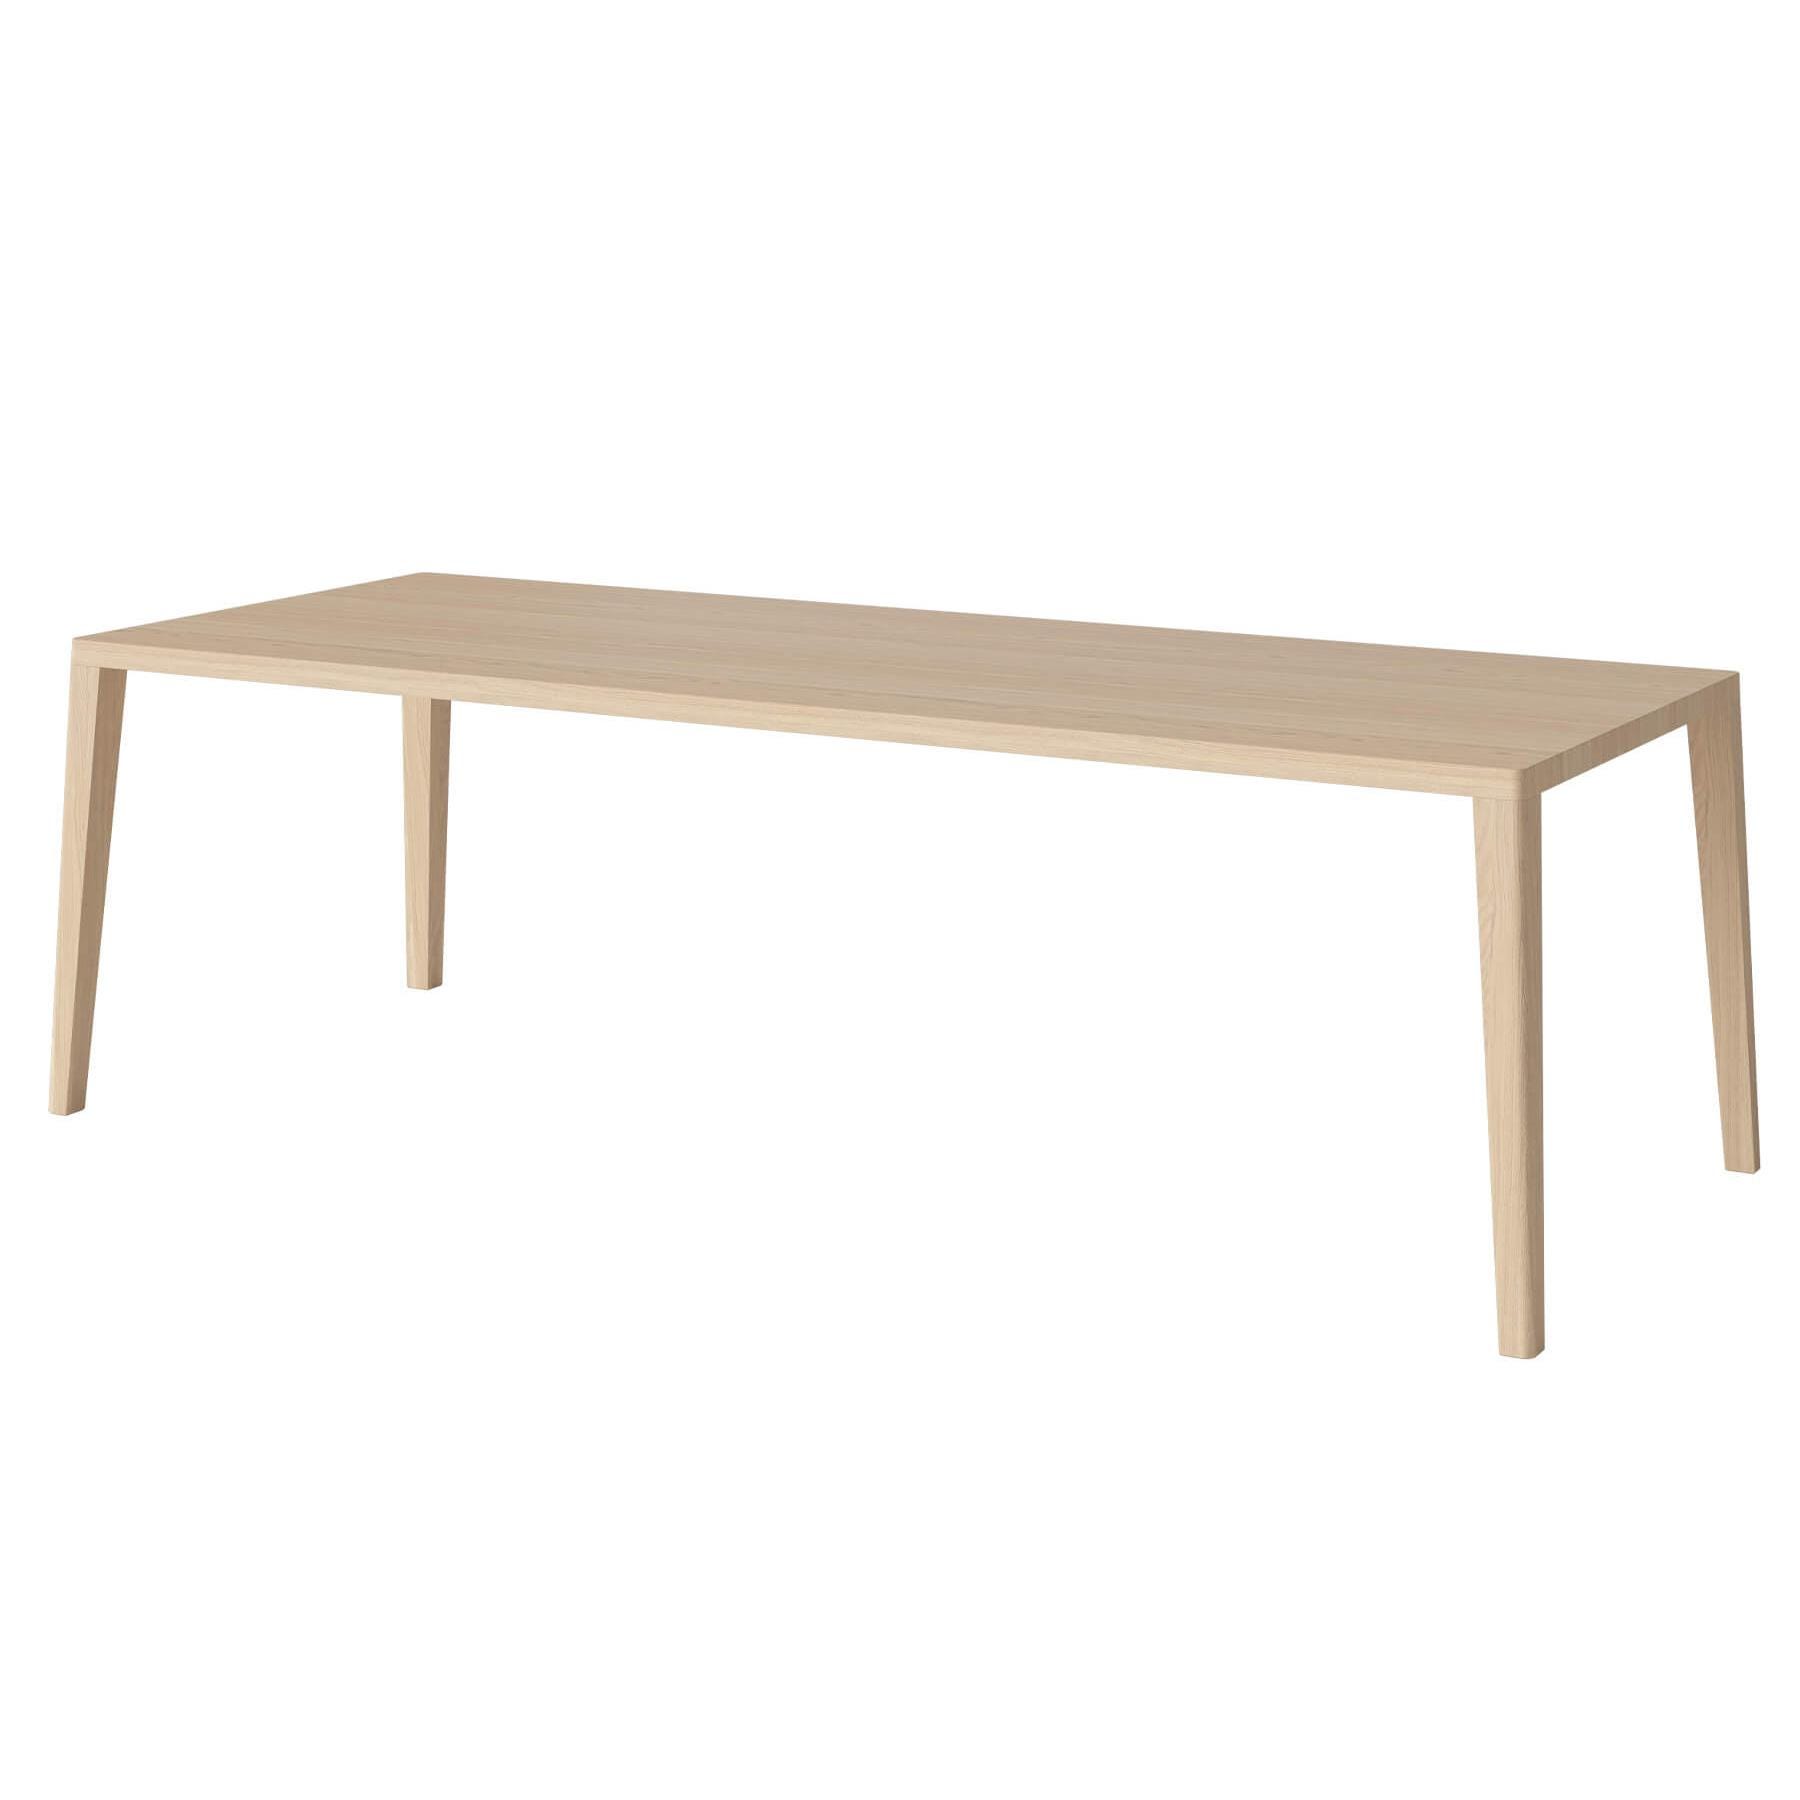 Bolia Graceful Dining Table 240 X 95cm White Oiled Legs Without Extension Leaves Light Wood Designer Furniture From Holloways Of Ludlow